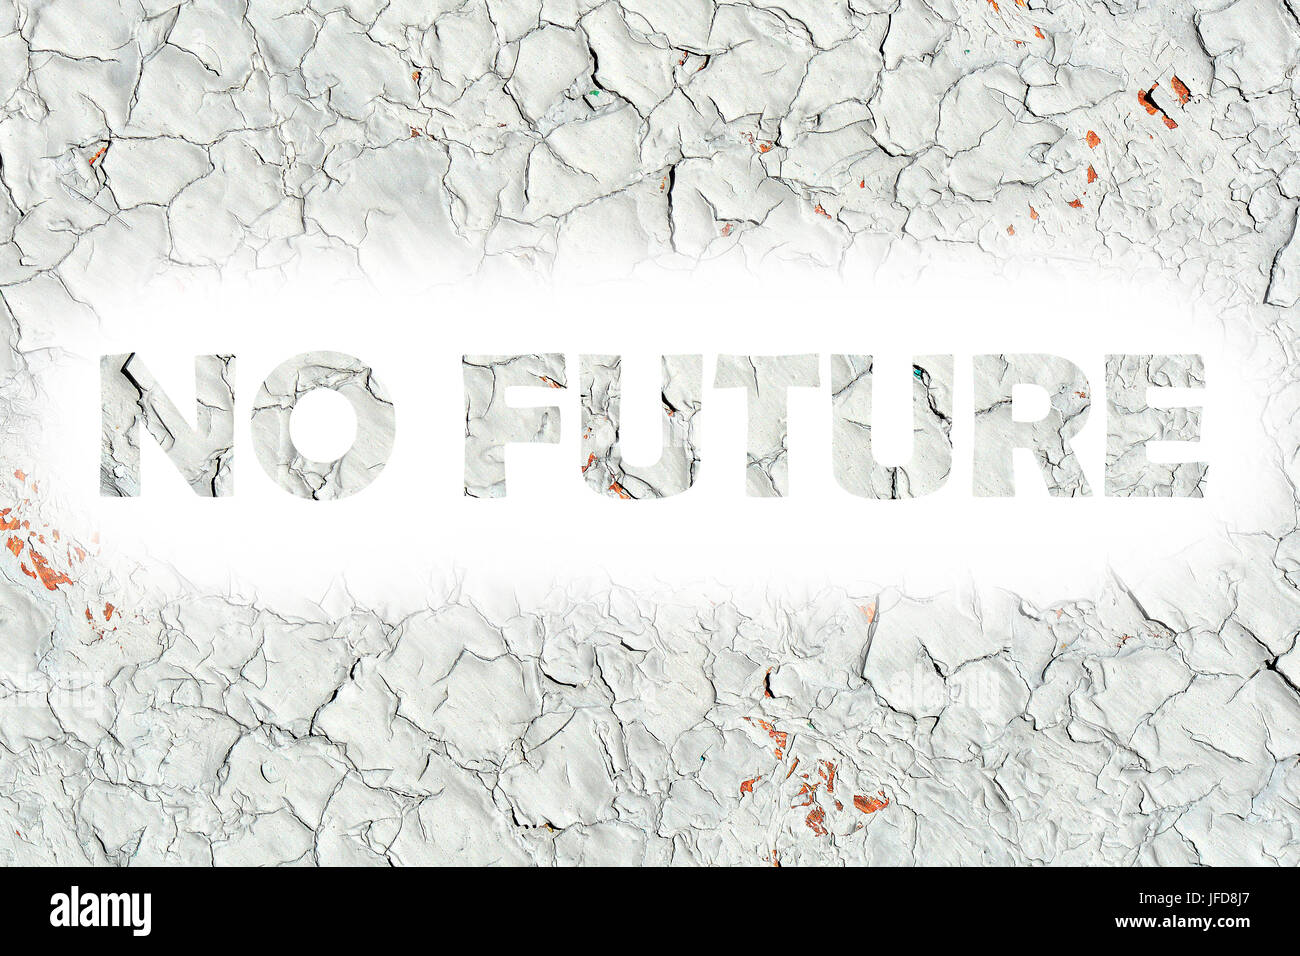 no future words print on the wooden plate Stock Photo